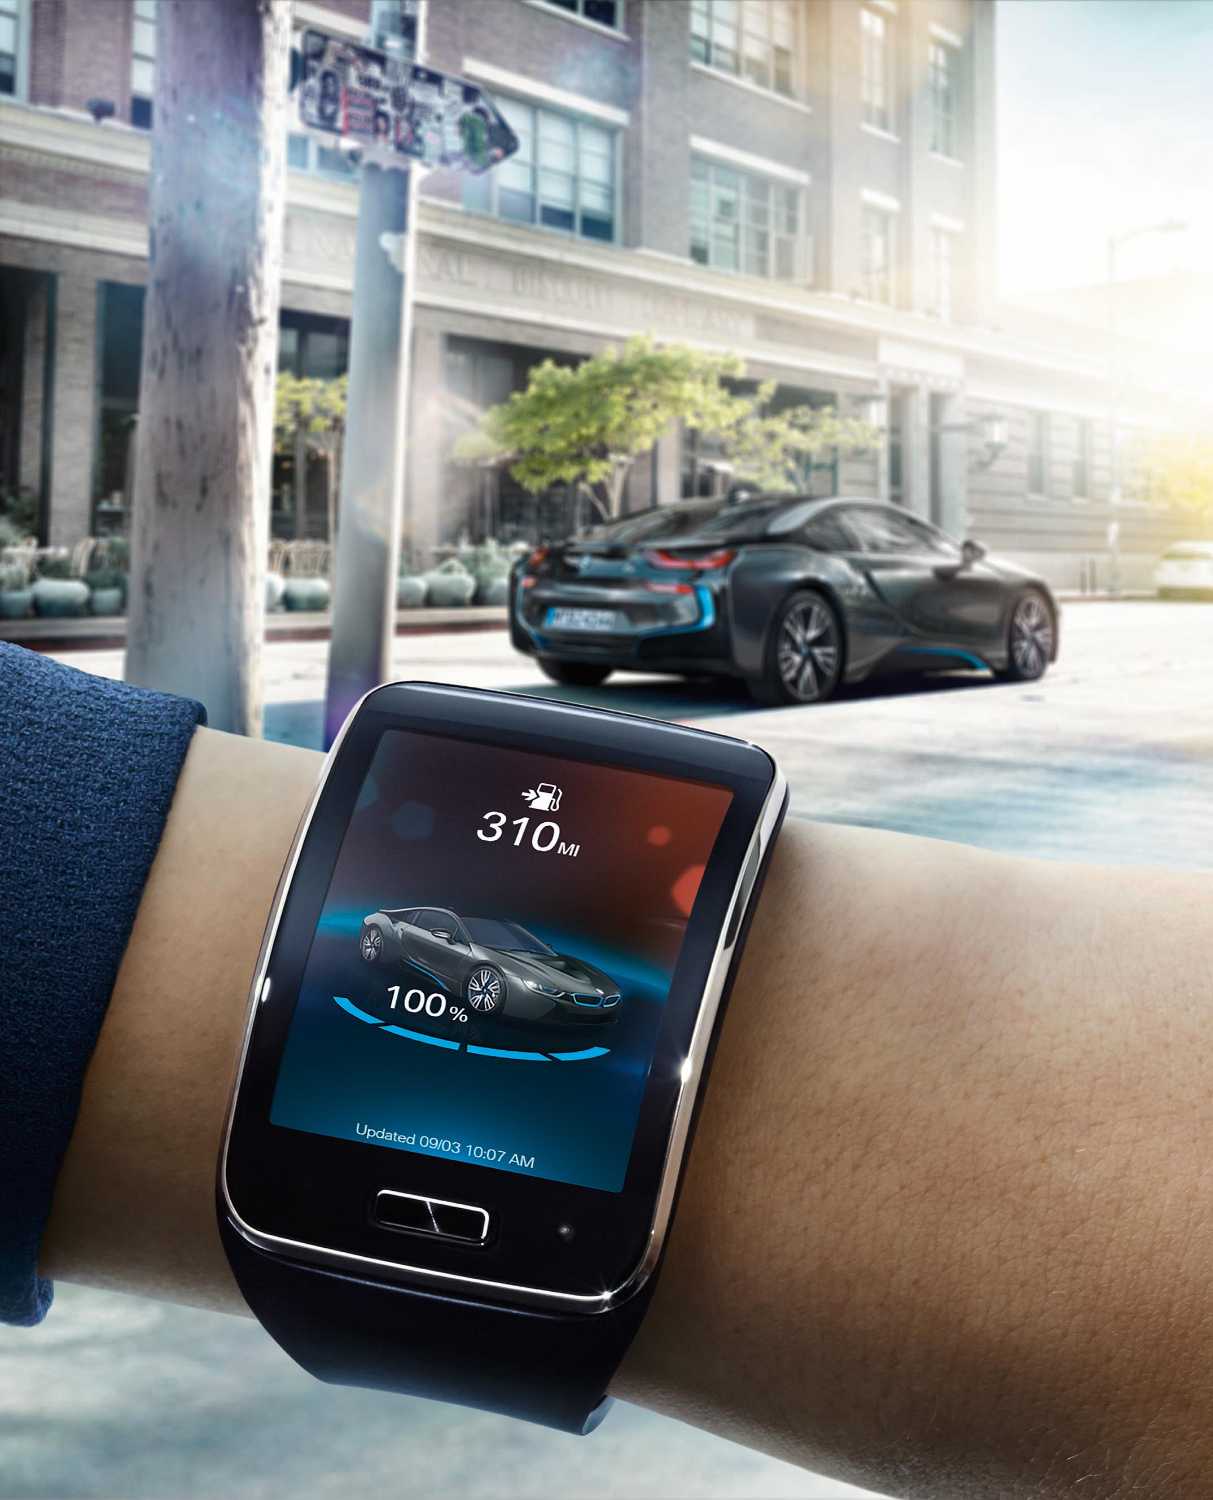 Bmw I Remote App A Winner In The Ces Innovation Awards 15 Seamlessly Connected With Bmw I Vehicles Via The Samsung Gear S Smartwatch